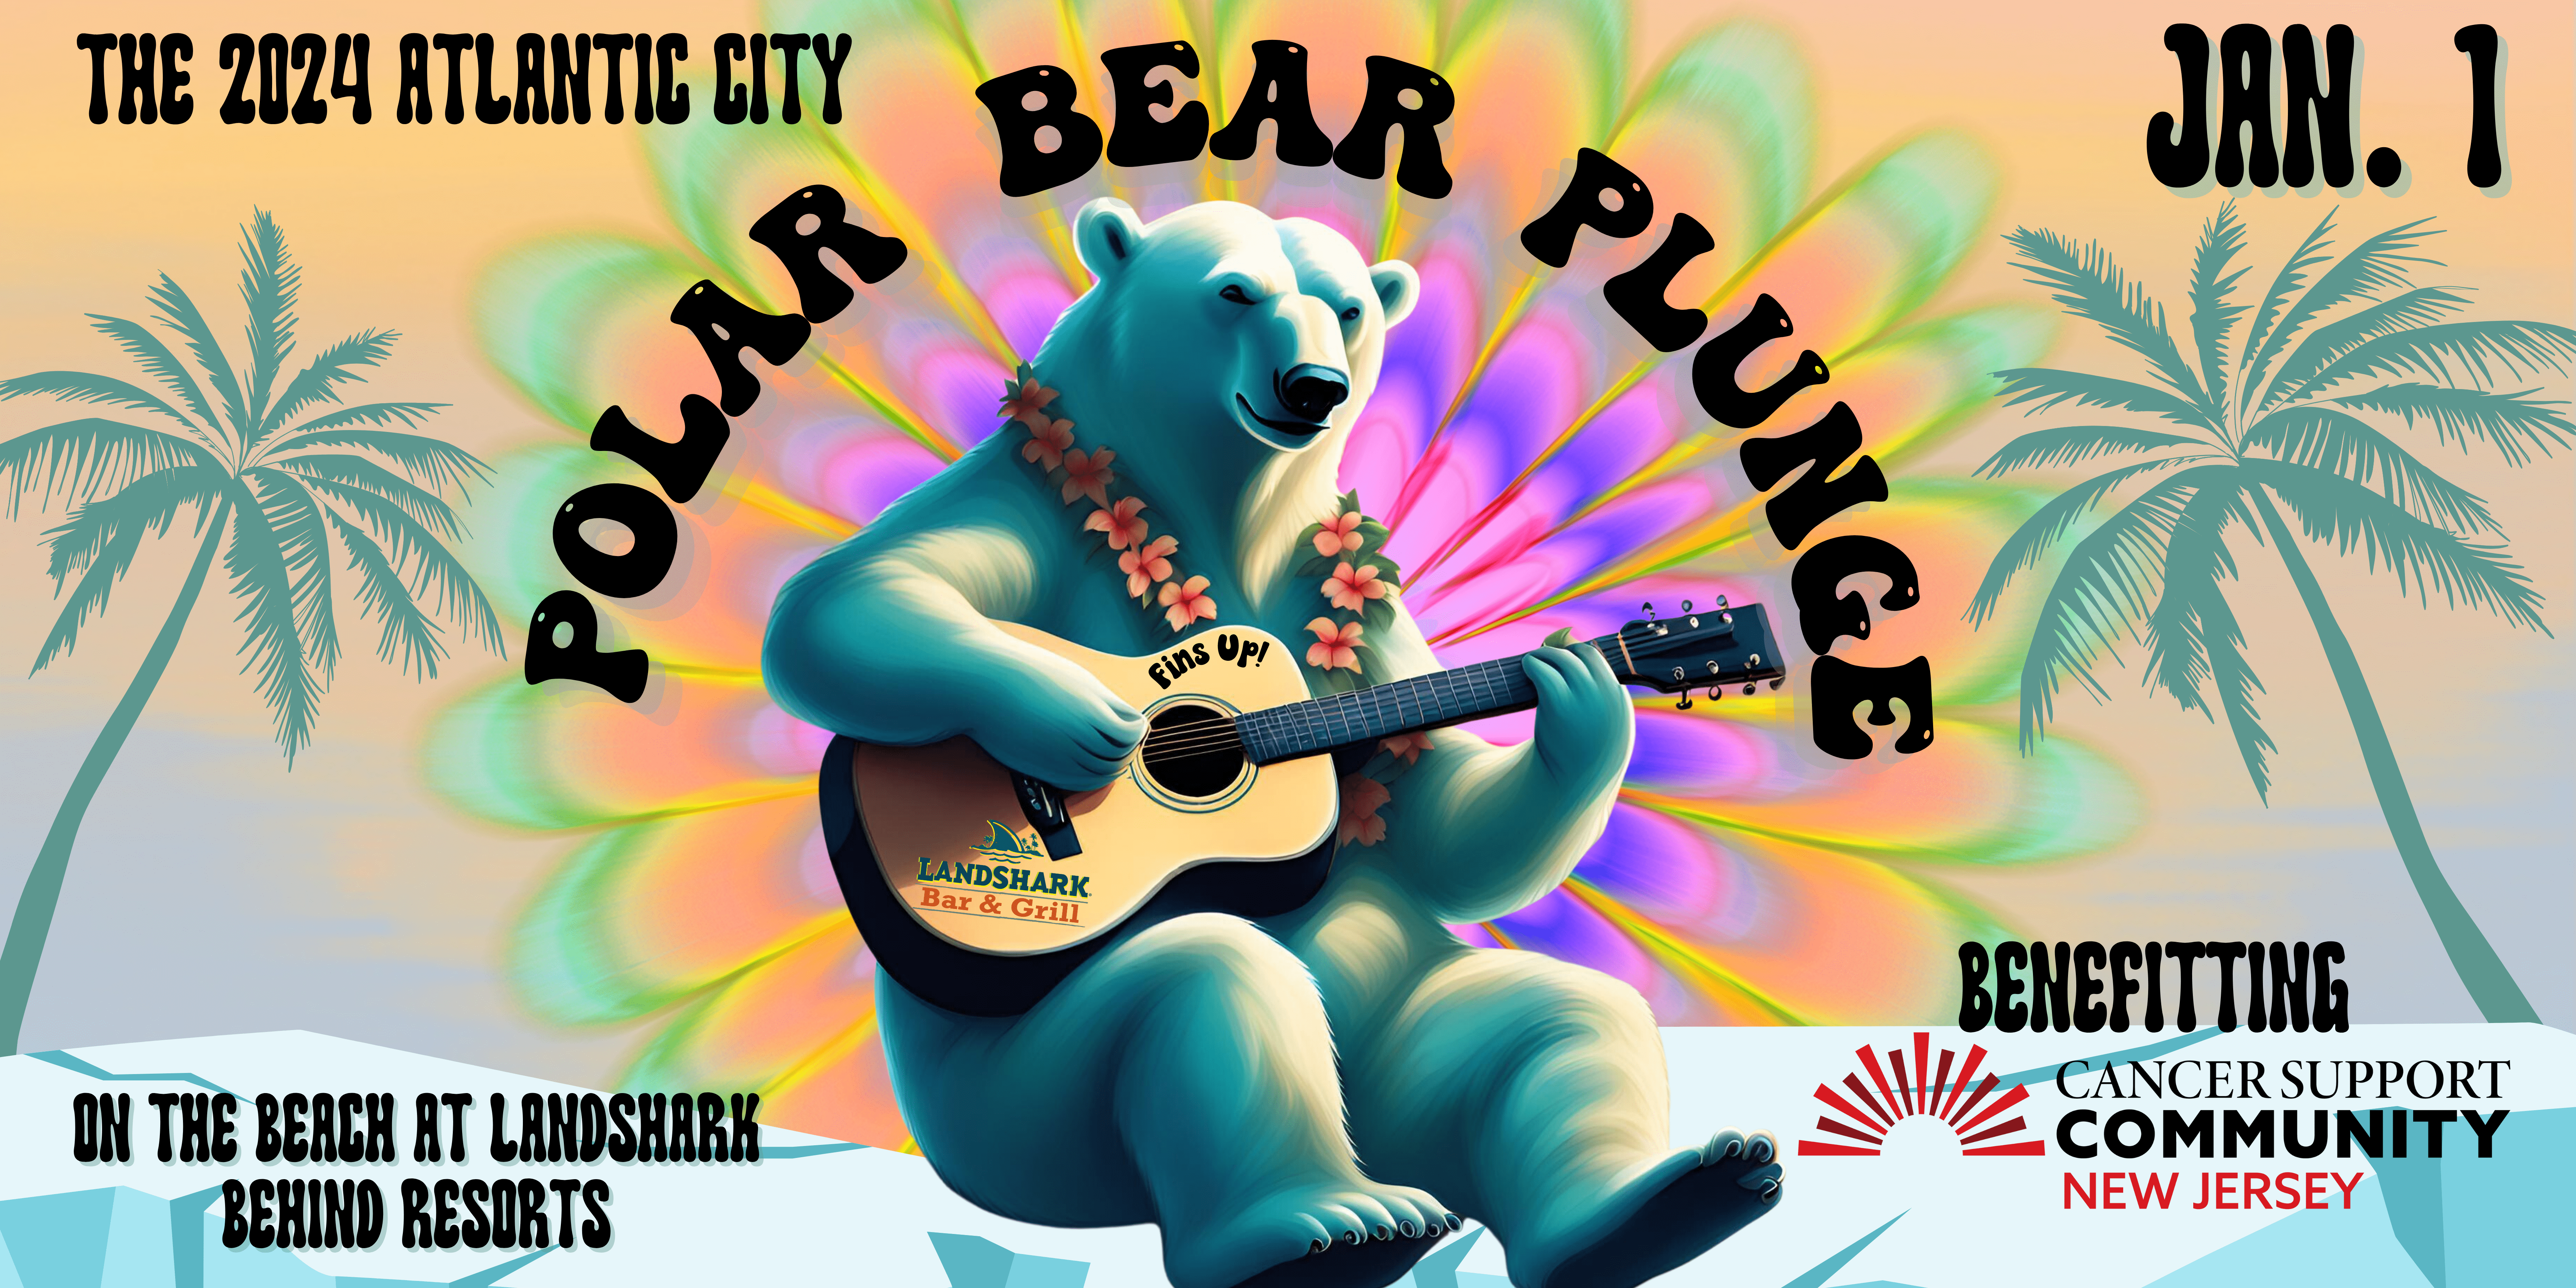 Join us for the 32nd Annual Atlantic City Polar Bear Plunge!